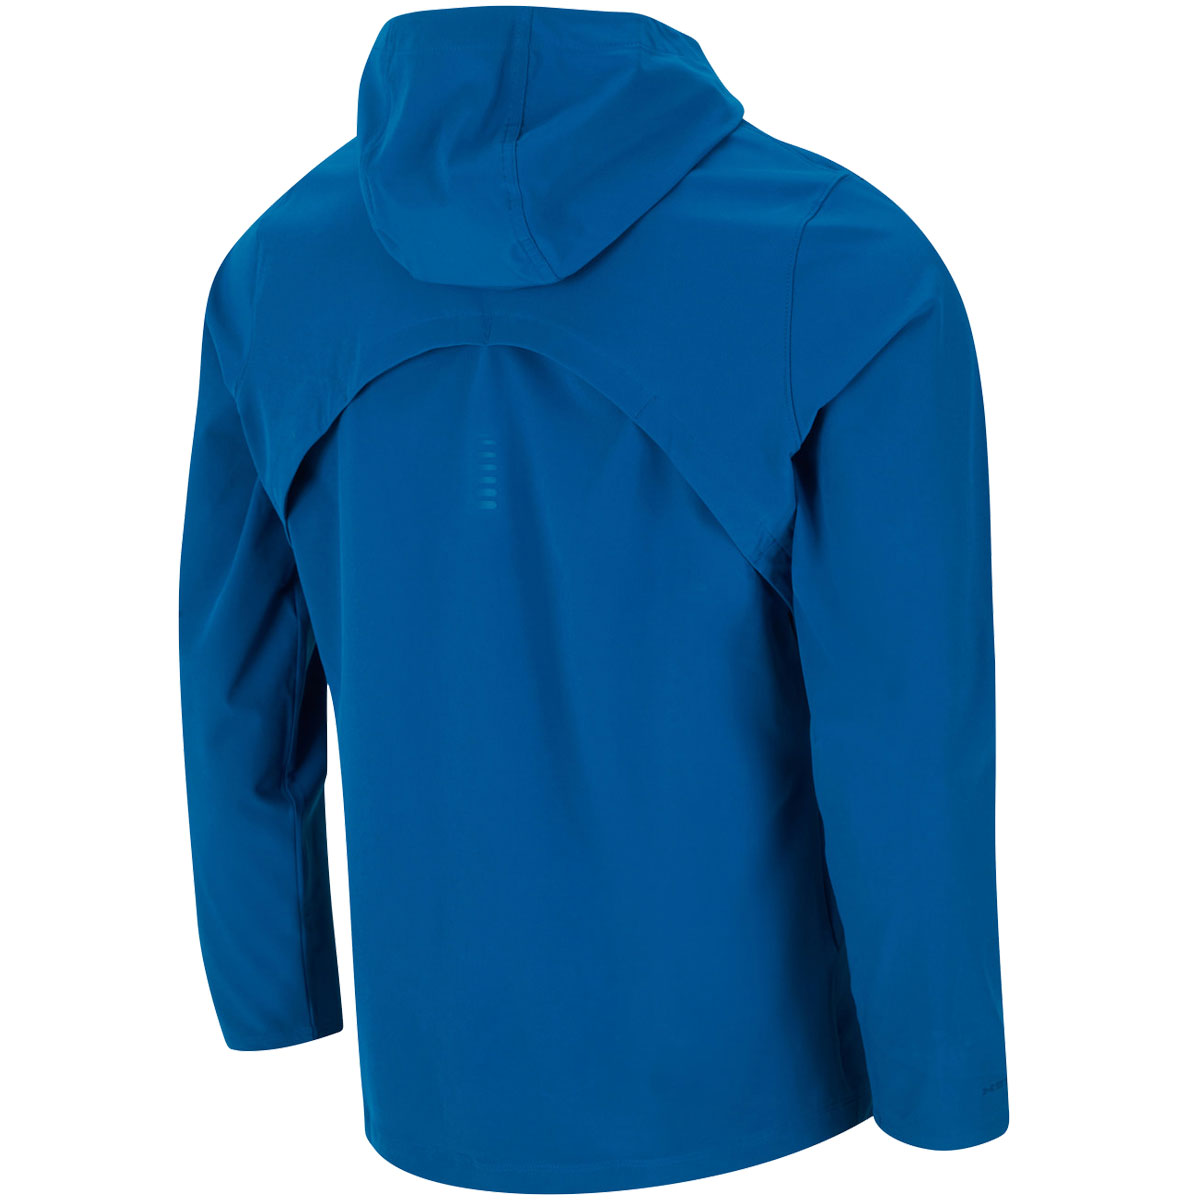 Under Armour Outrun The Storm Running Jacket - Mens - Varsity Blue